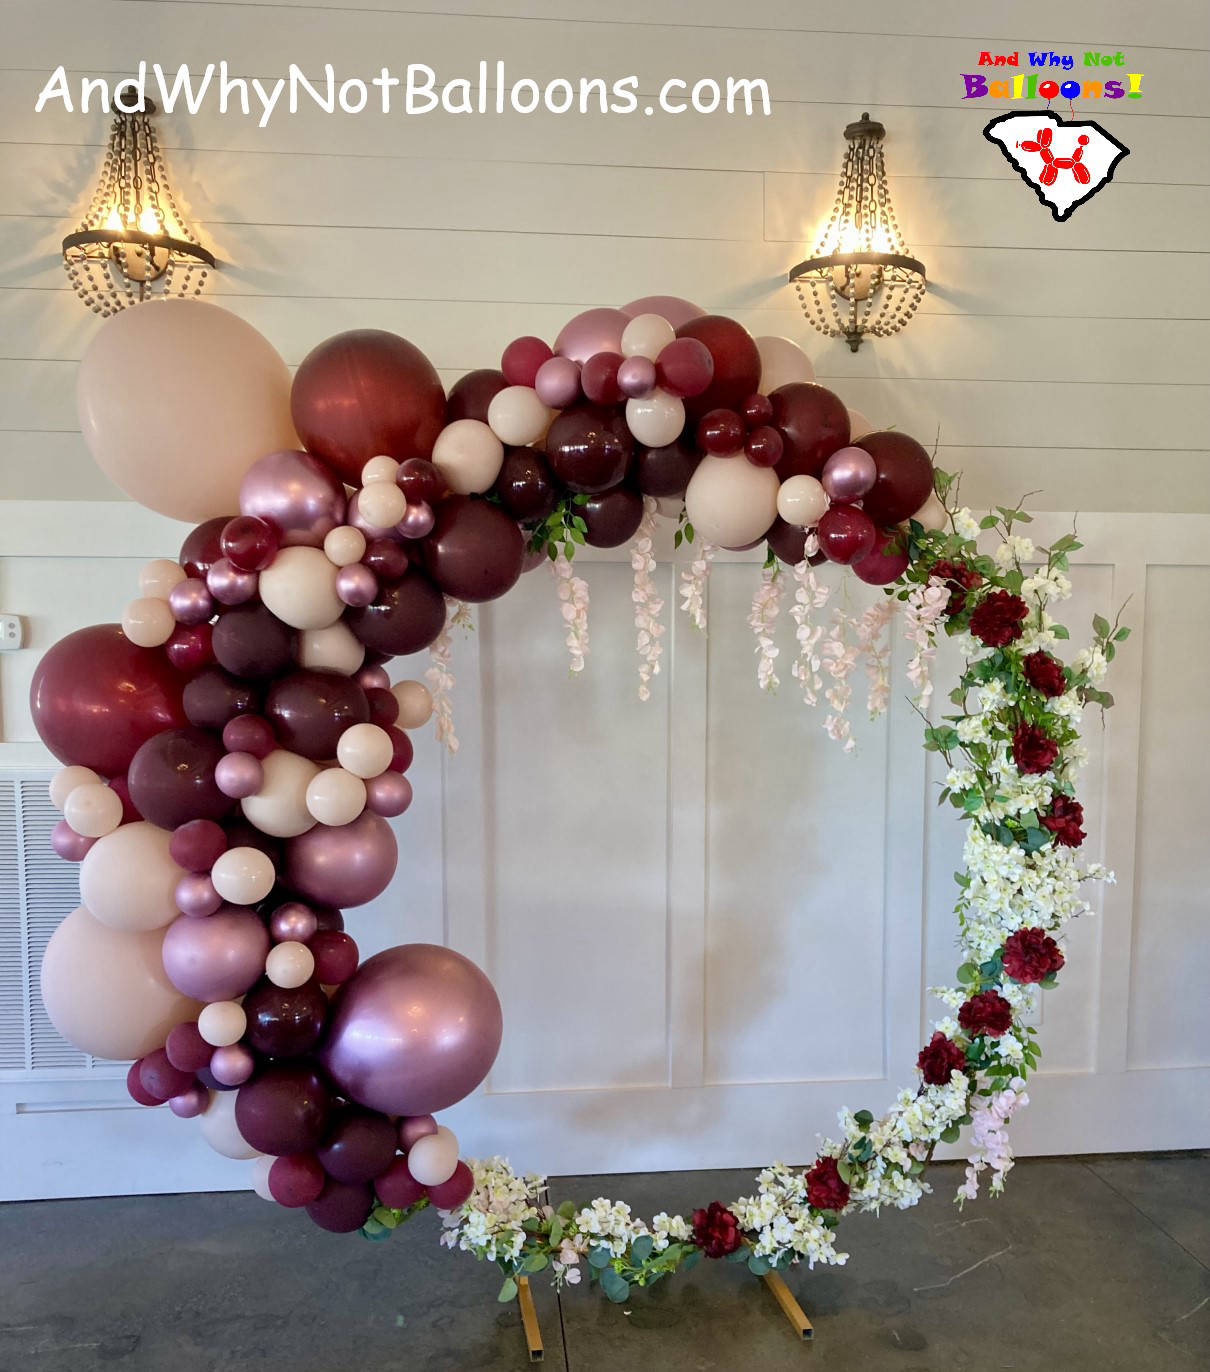 And Why Not Balloons Wedding gold ring simpsonville sc